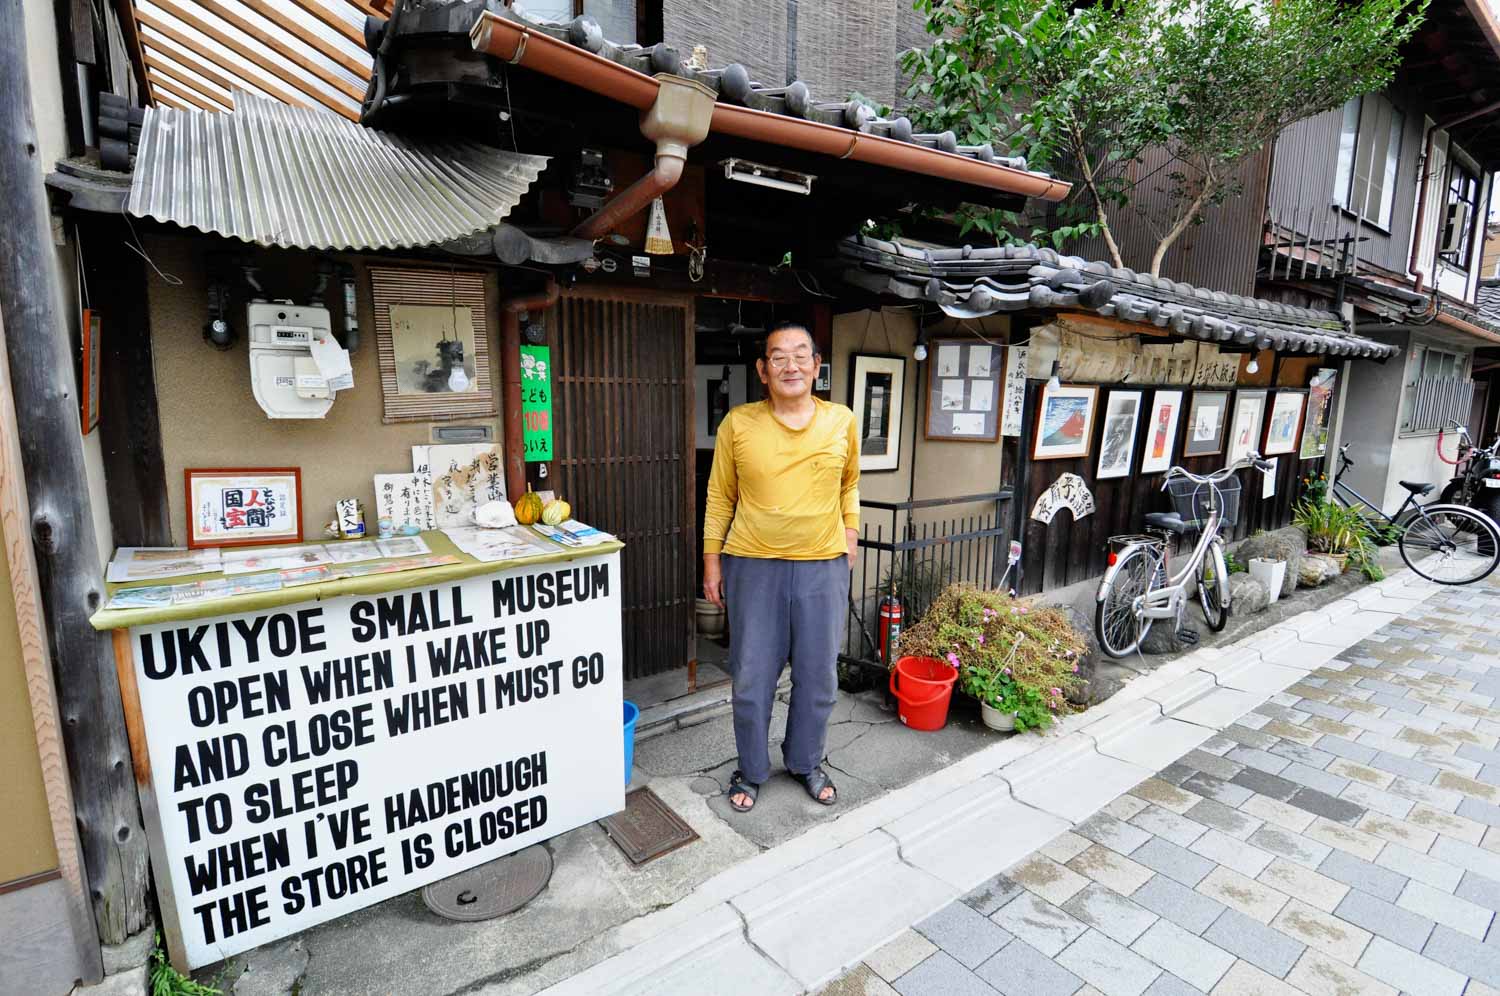  Master printer Mamoru Ichimura outside his workplace, which he describes as “the smallest ukiyo-e museum in the world.” 